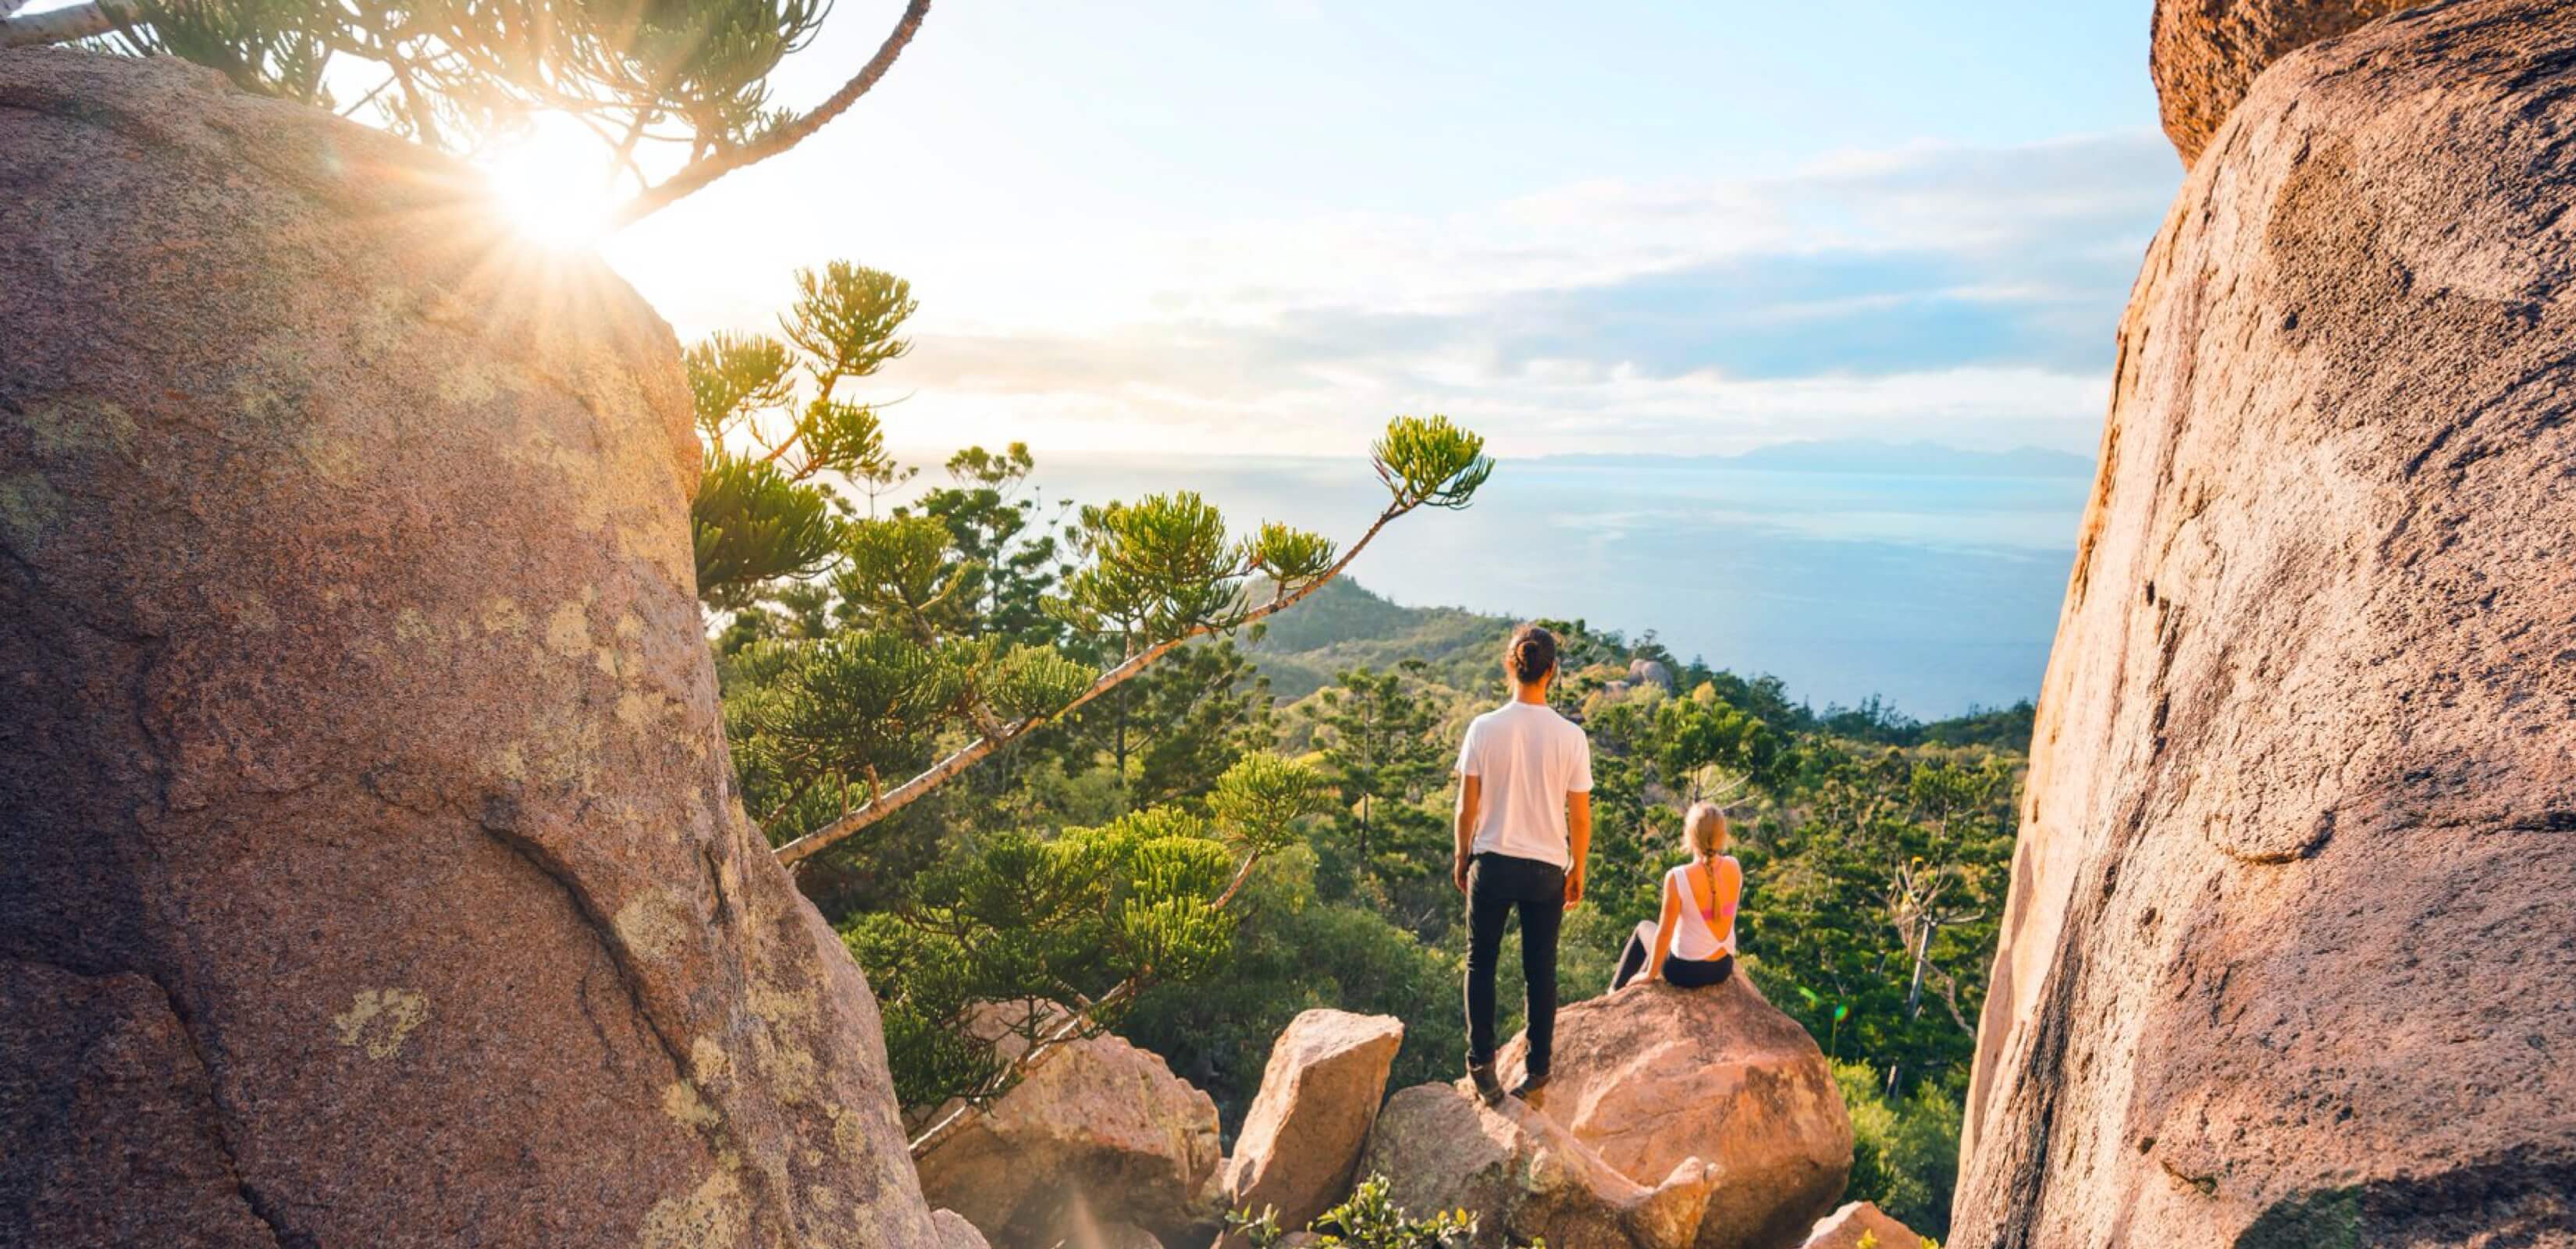 Valentine's Day in Townsville: How to plan the perfect romantic day